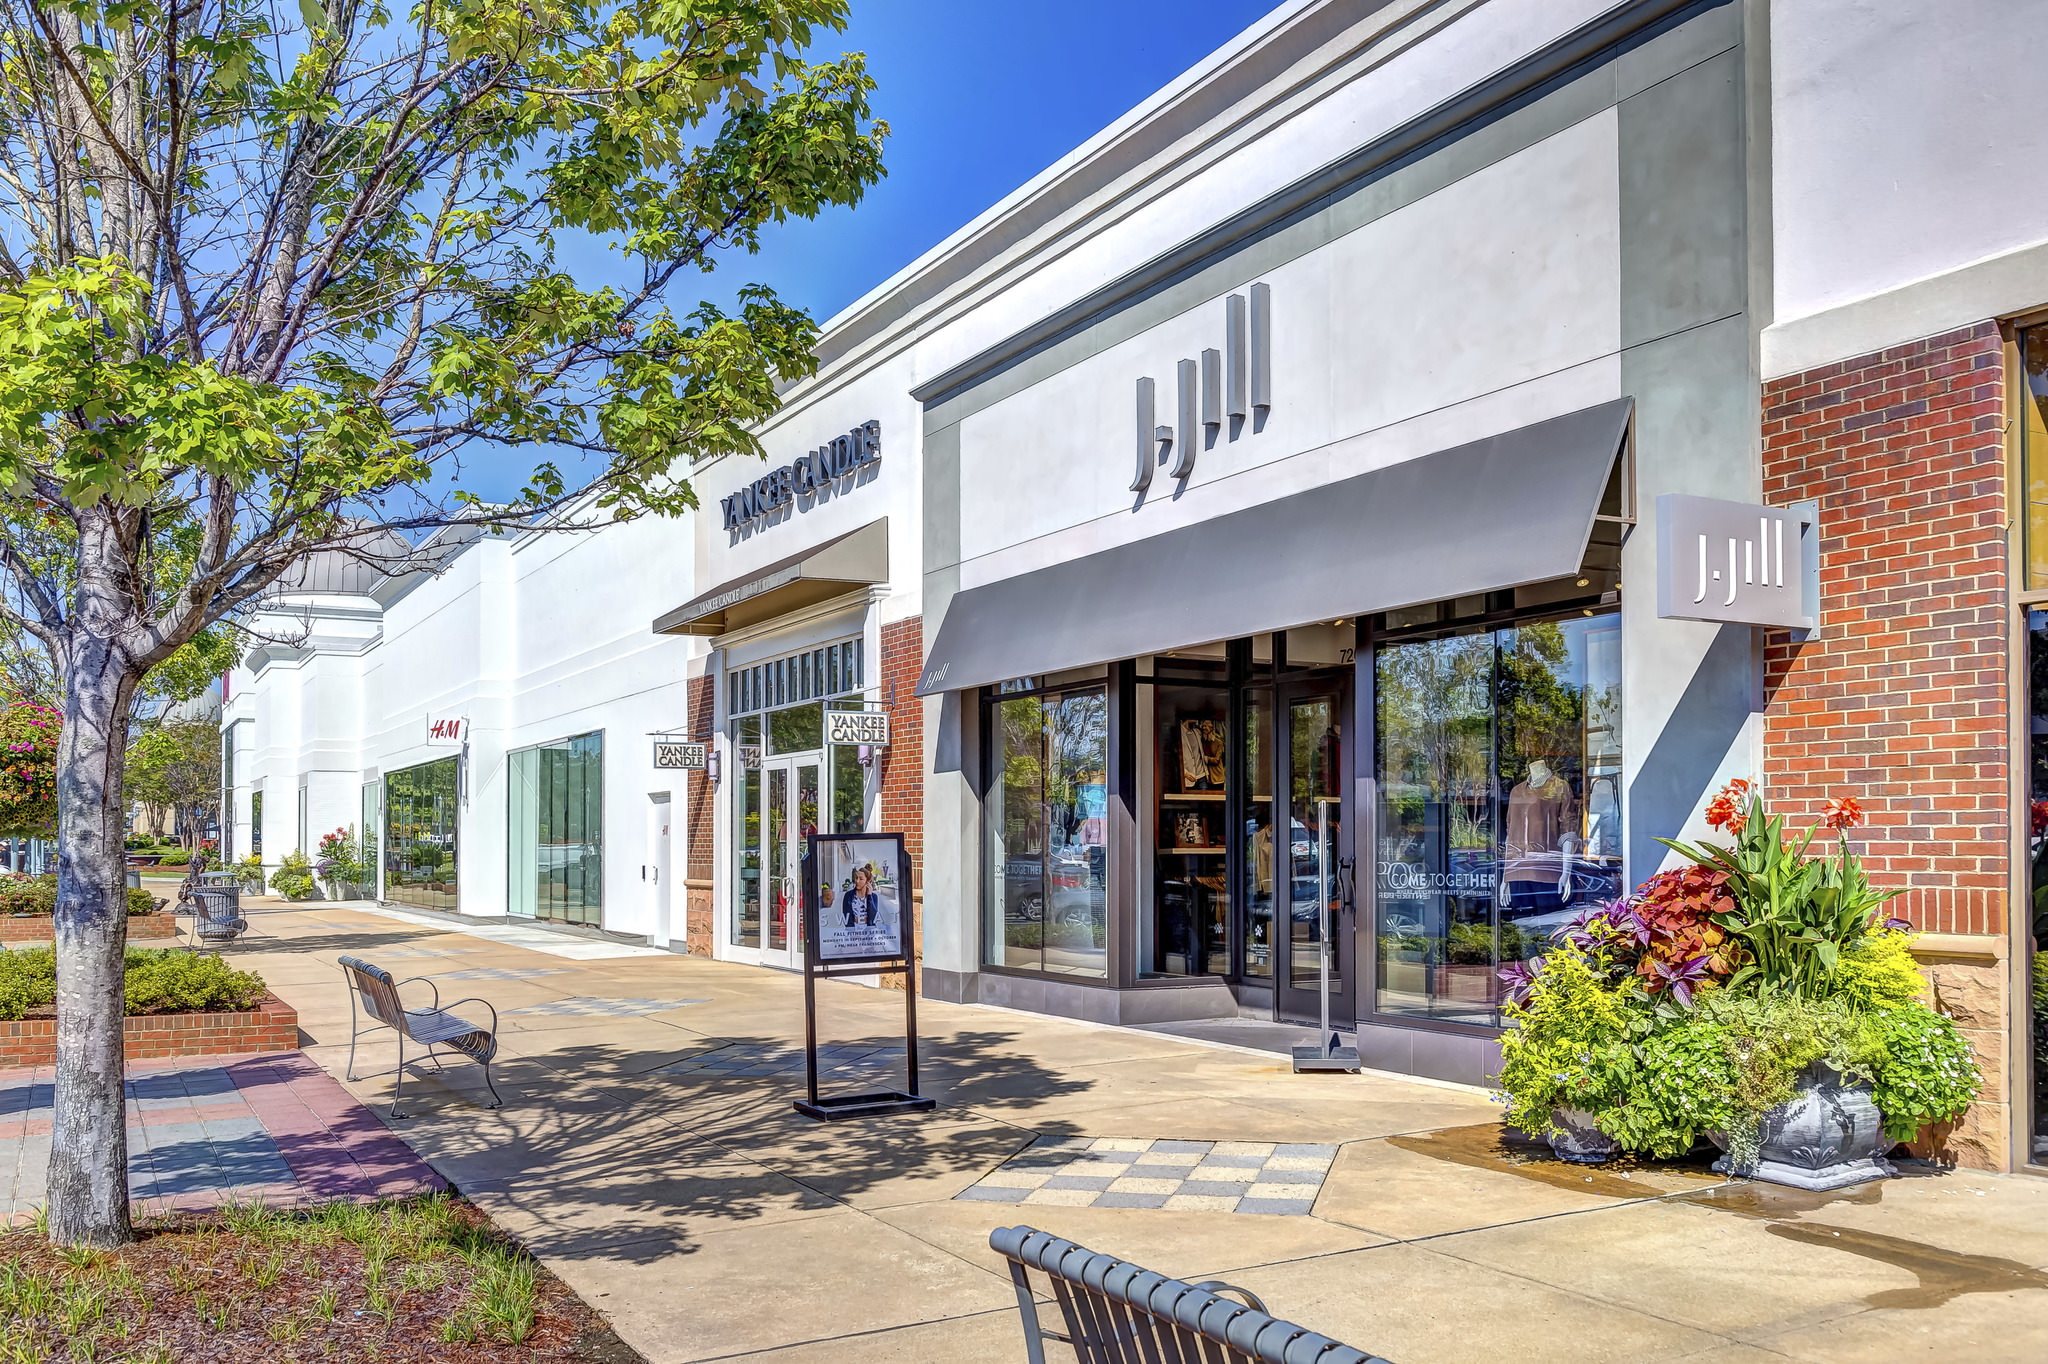 J. Jill - The Shoppes at EastChase